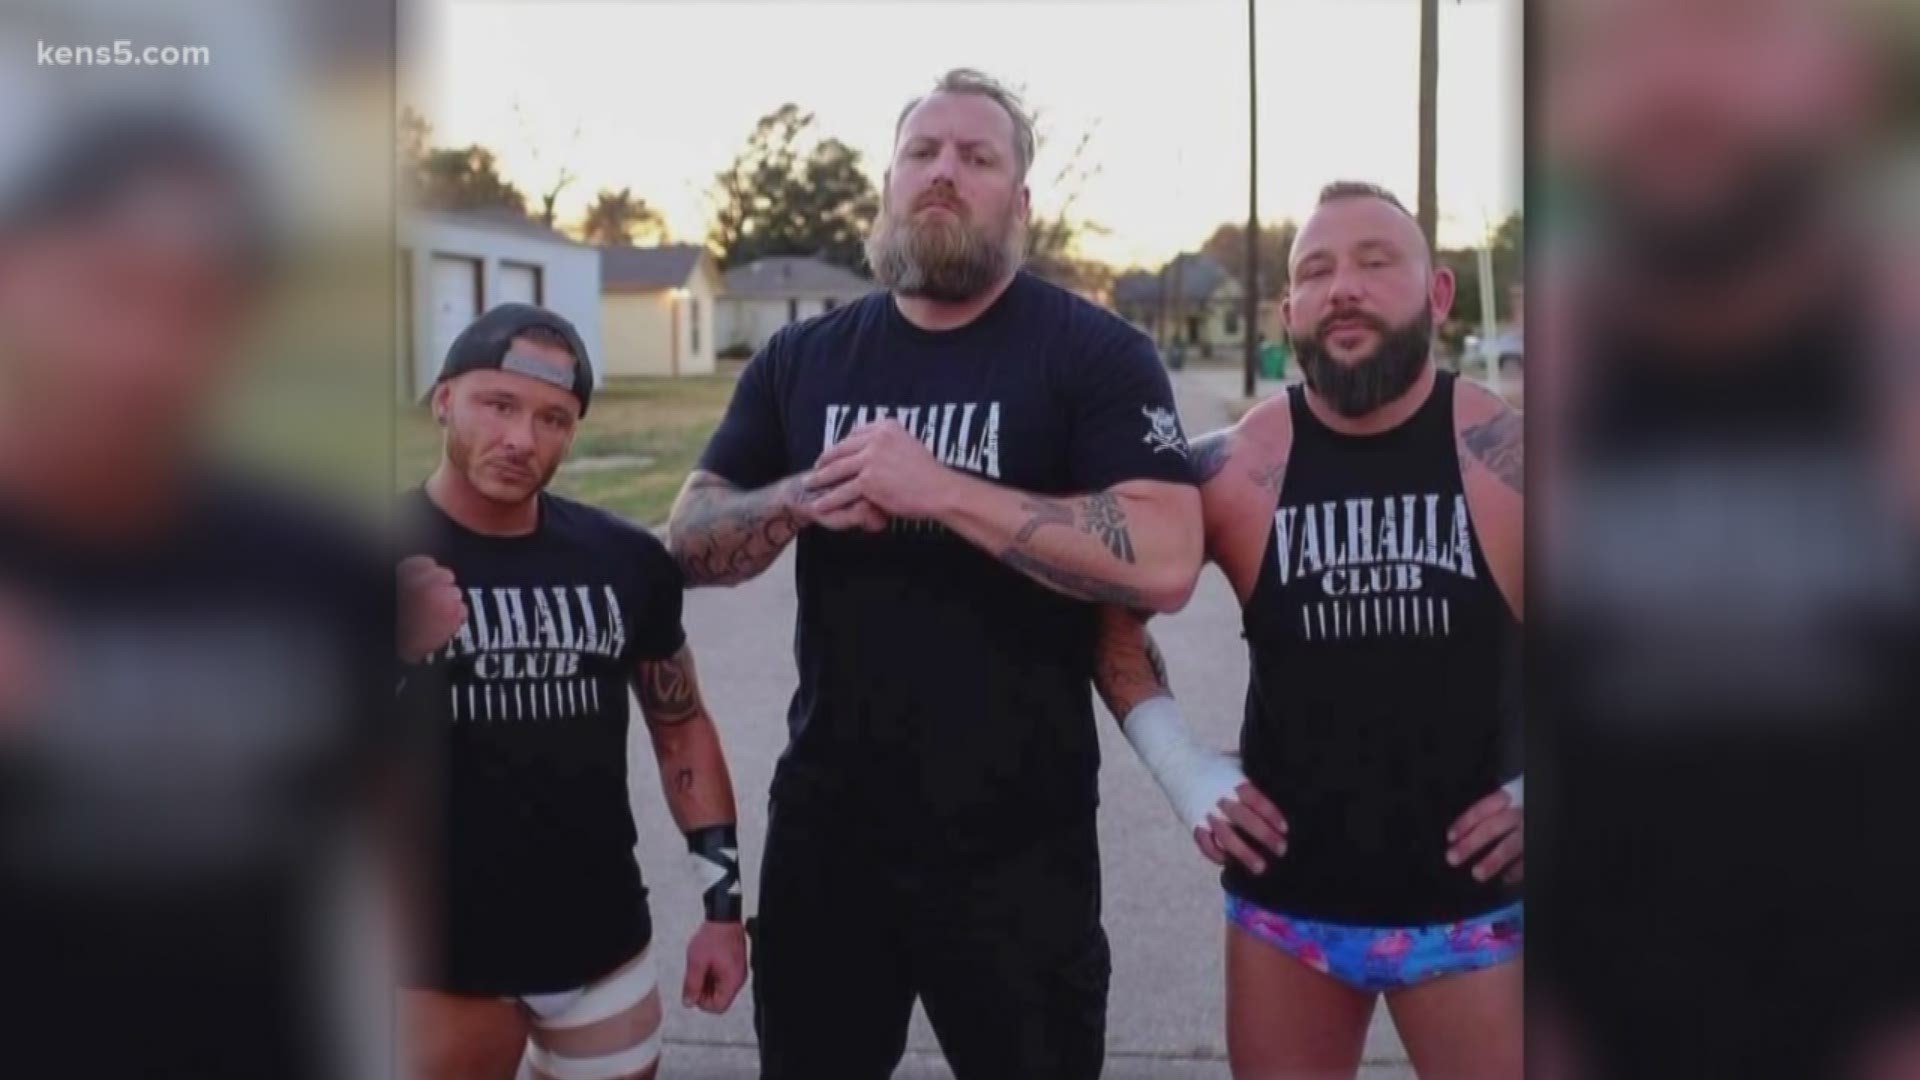 Veterans who are facing battles after war are finding healing in the wrestling ring. They're taking this fight to help other veterans cope with PTSD.